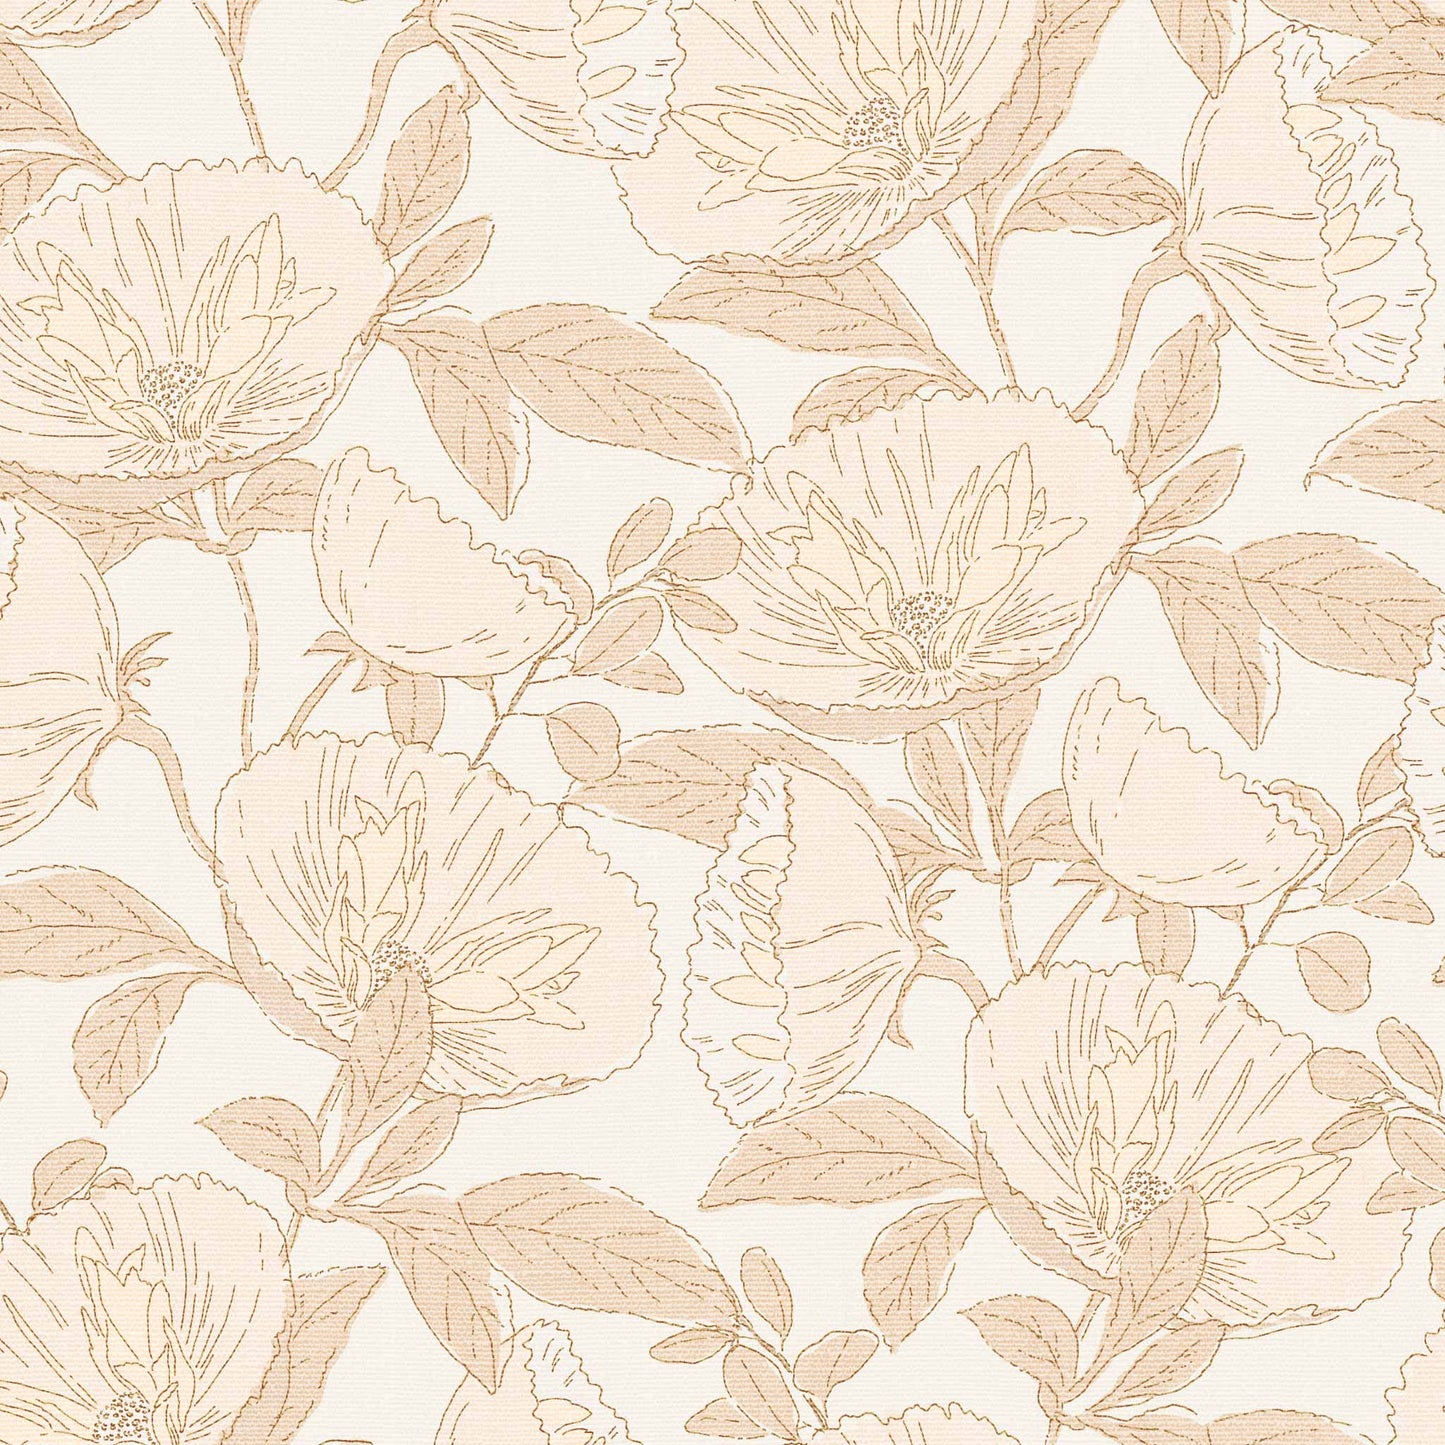 Bring the beauty of nature into your home with this stunning Spring Cosmos Wallpaper. Showcasing blooming colorful flowers, this wallpaper will make an exquisite statement in any room. Its smooth cream background makes it an inviting and timeless addition to your home.